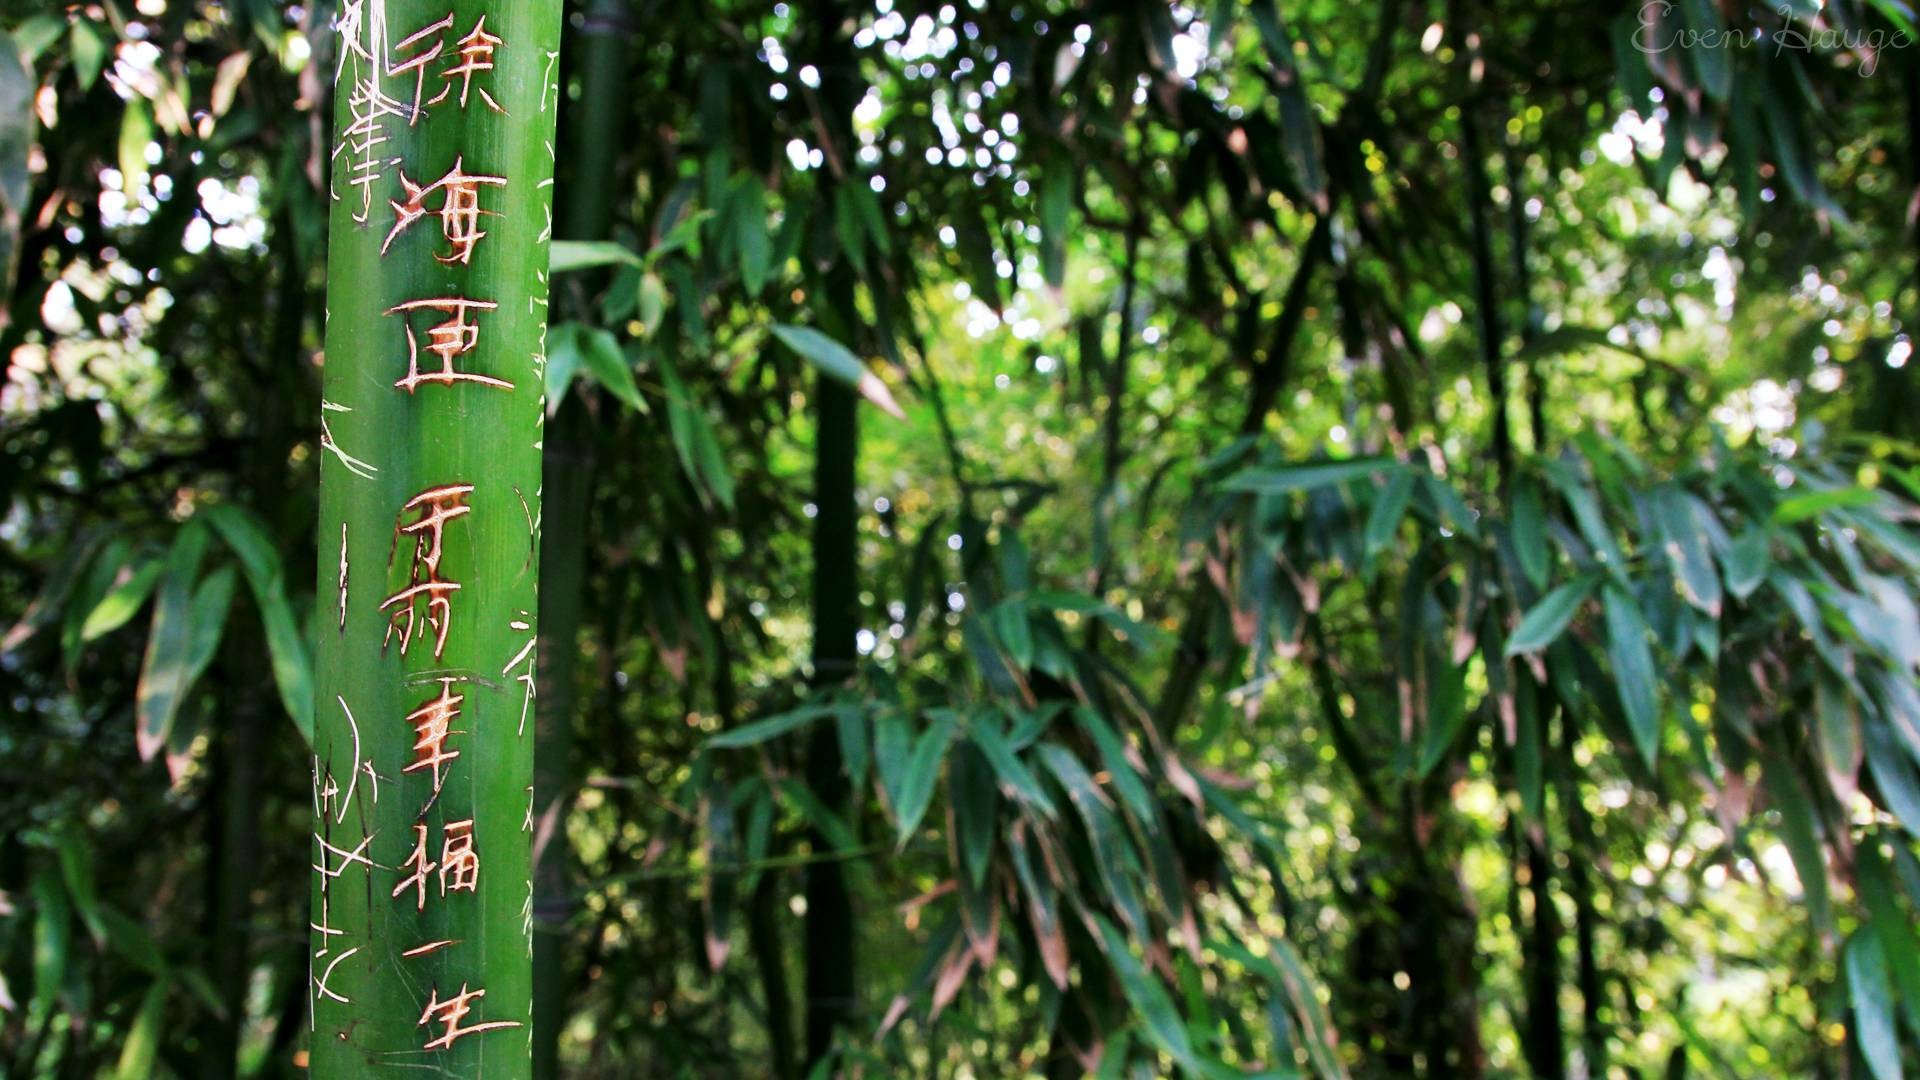 General 1920x1080 bamboo green nature plants